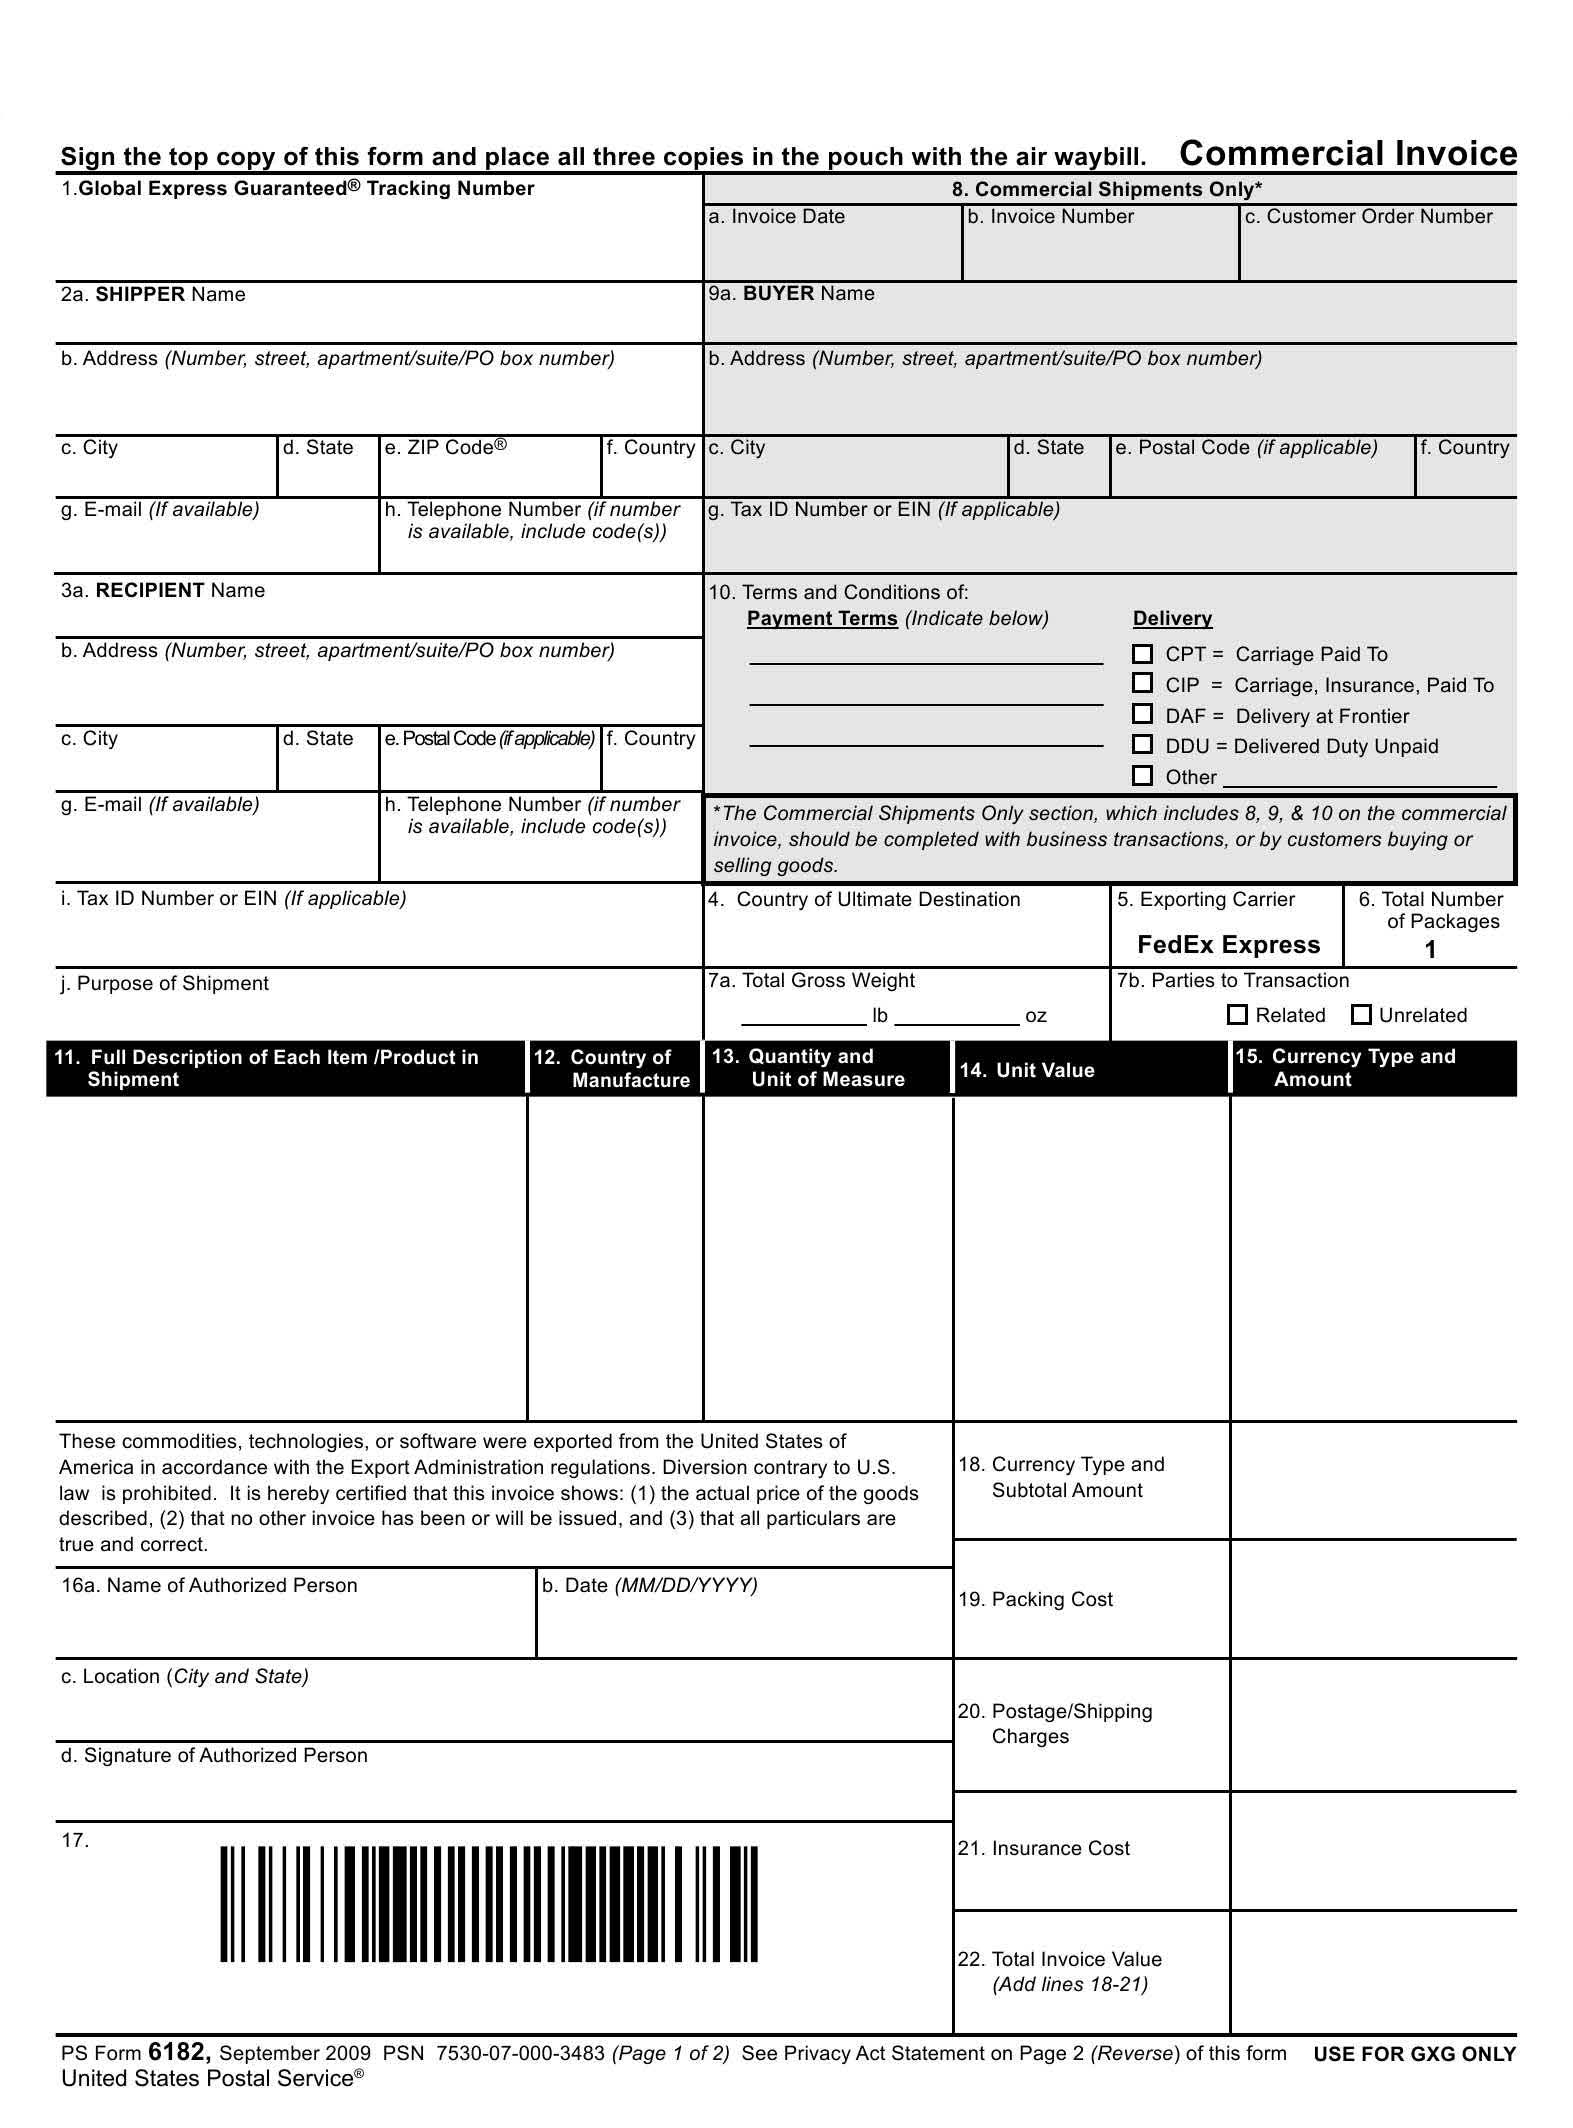 commercial invoice commercial invoice form